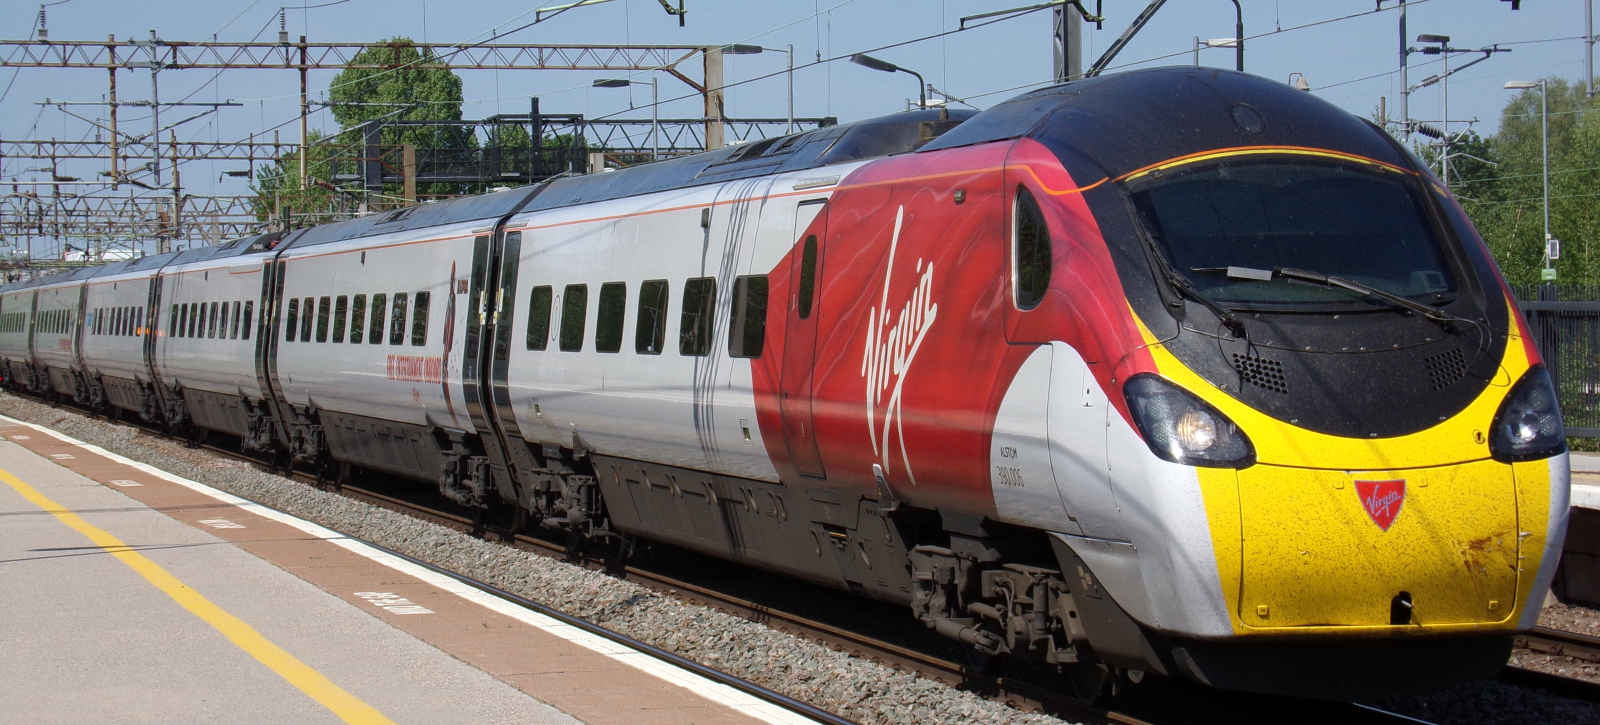 Virgin Trains West Coast 390006 passing through London Euston in May 2018